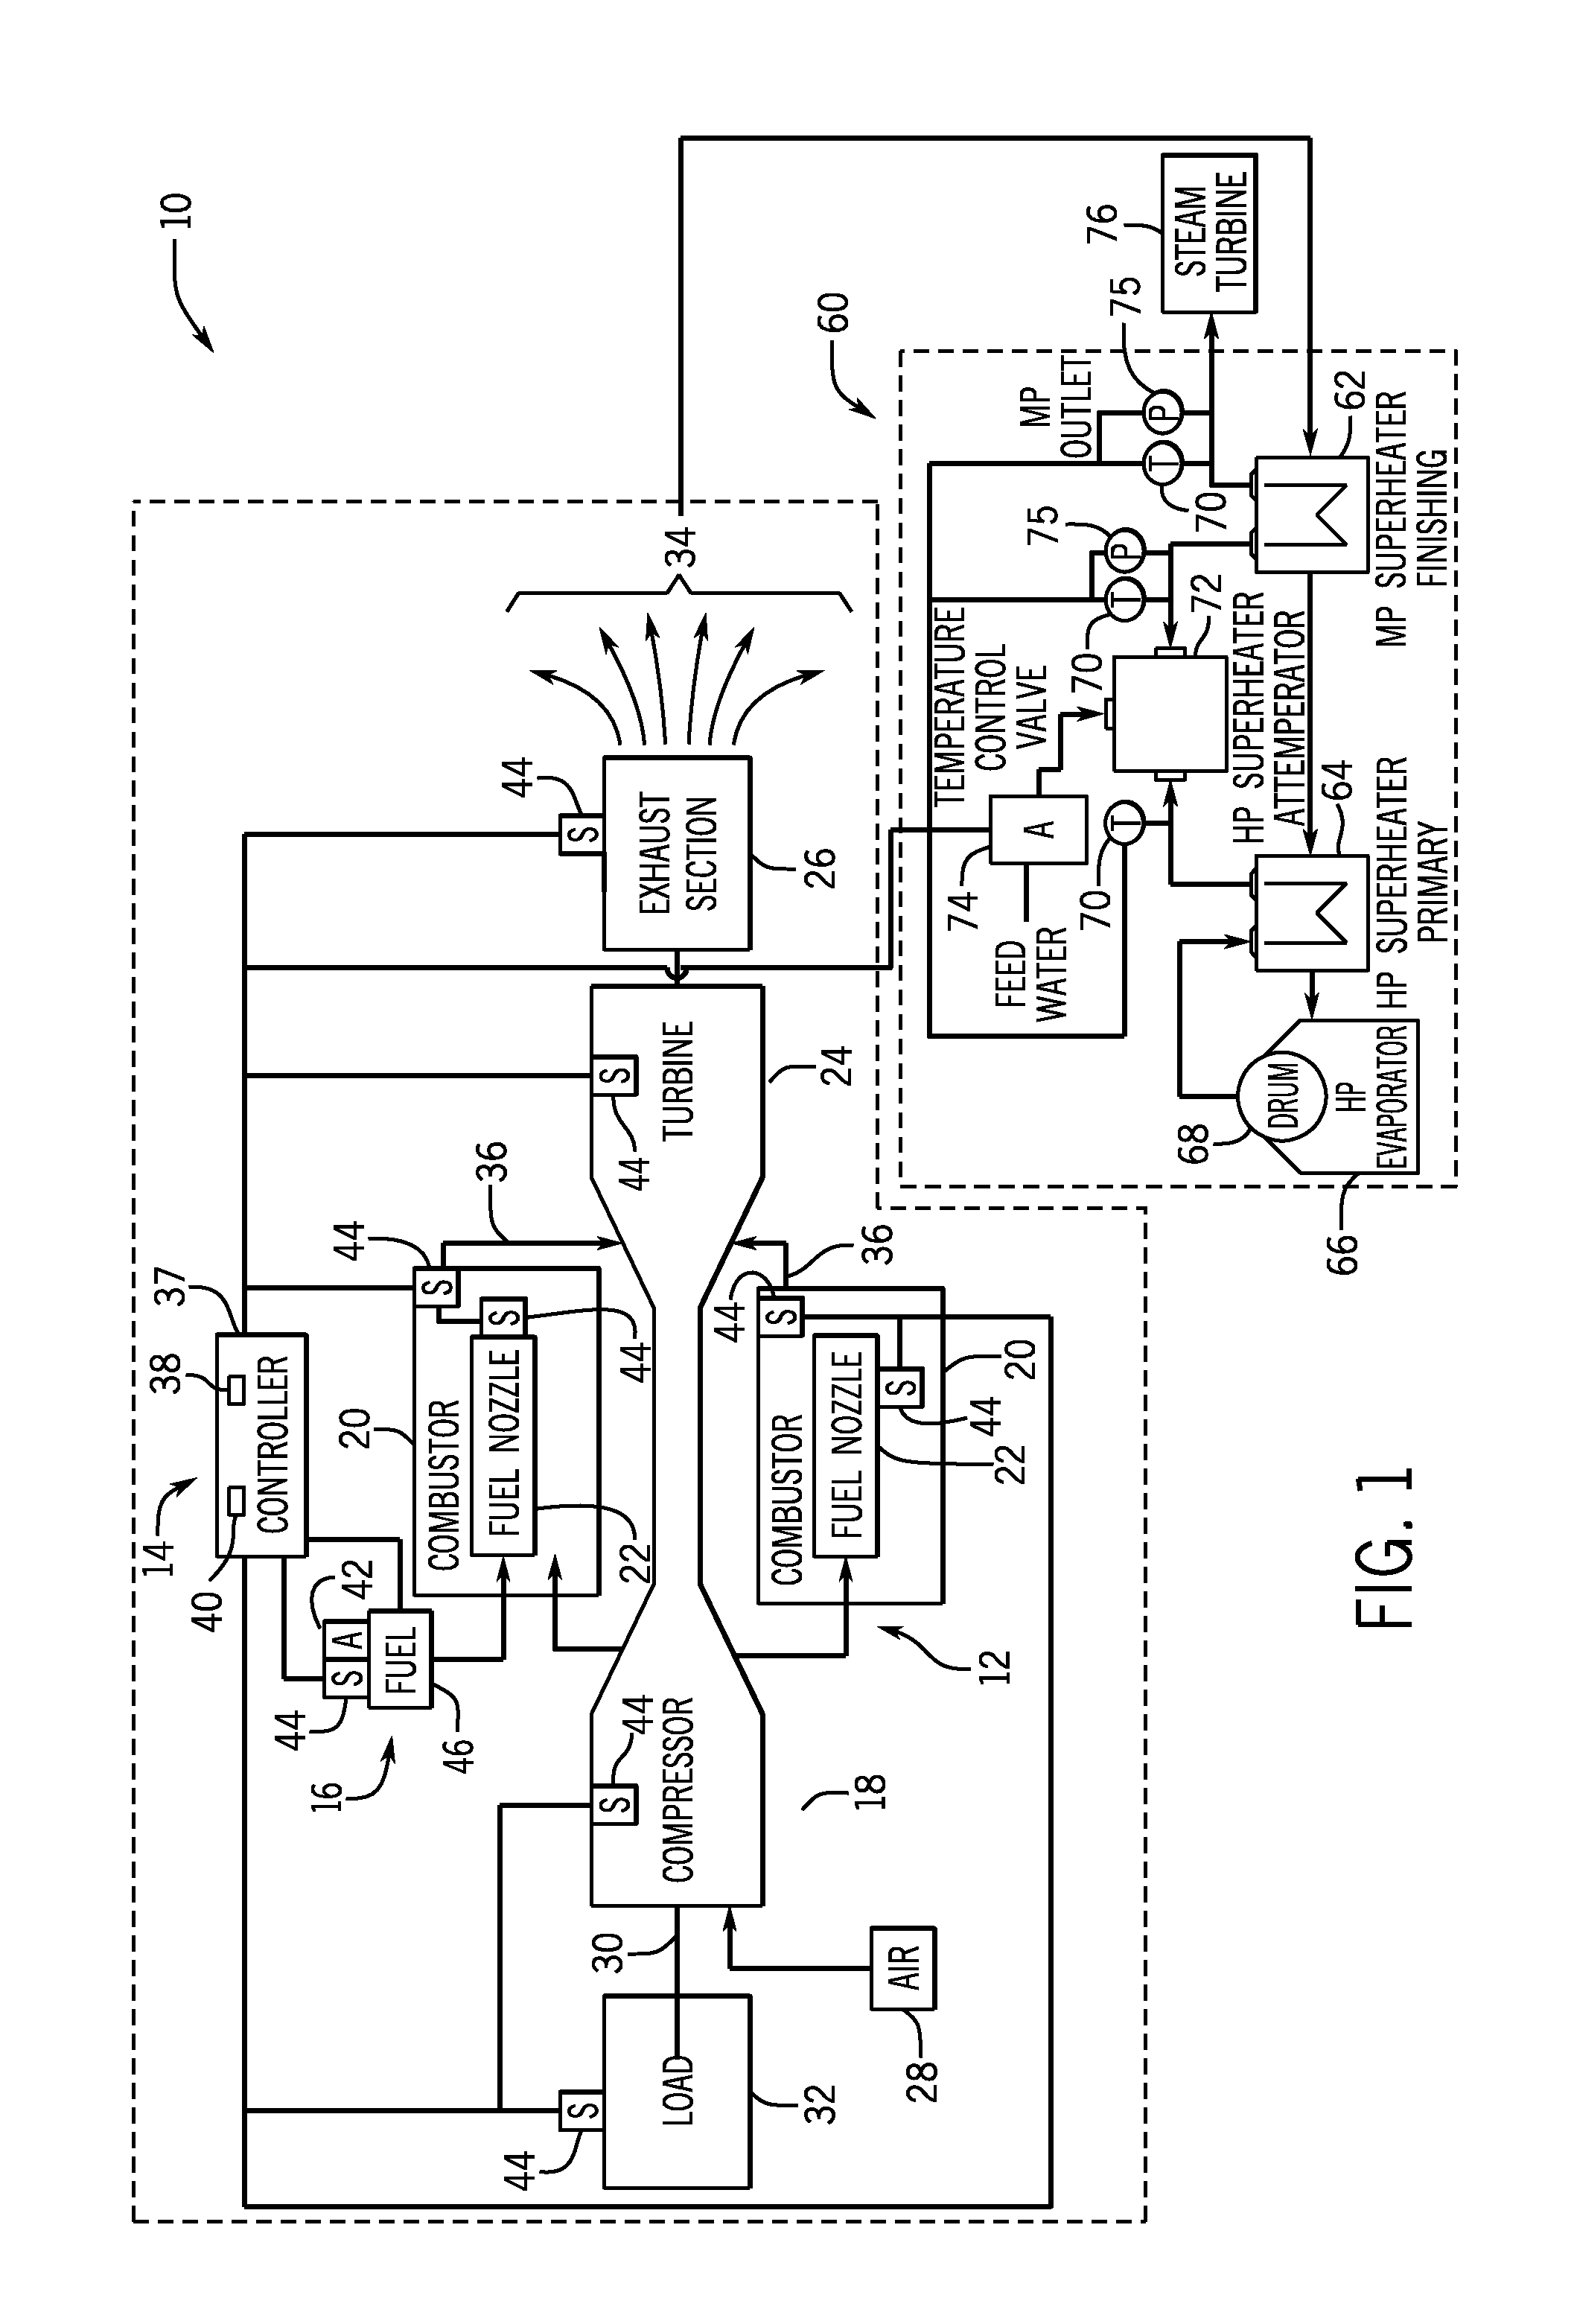 Systems and methods for improved combined cycle control